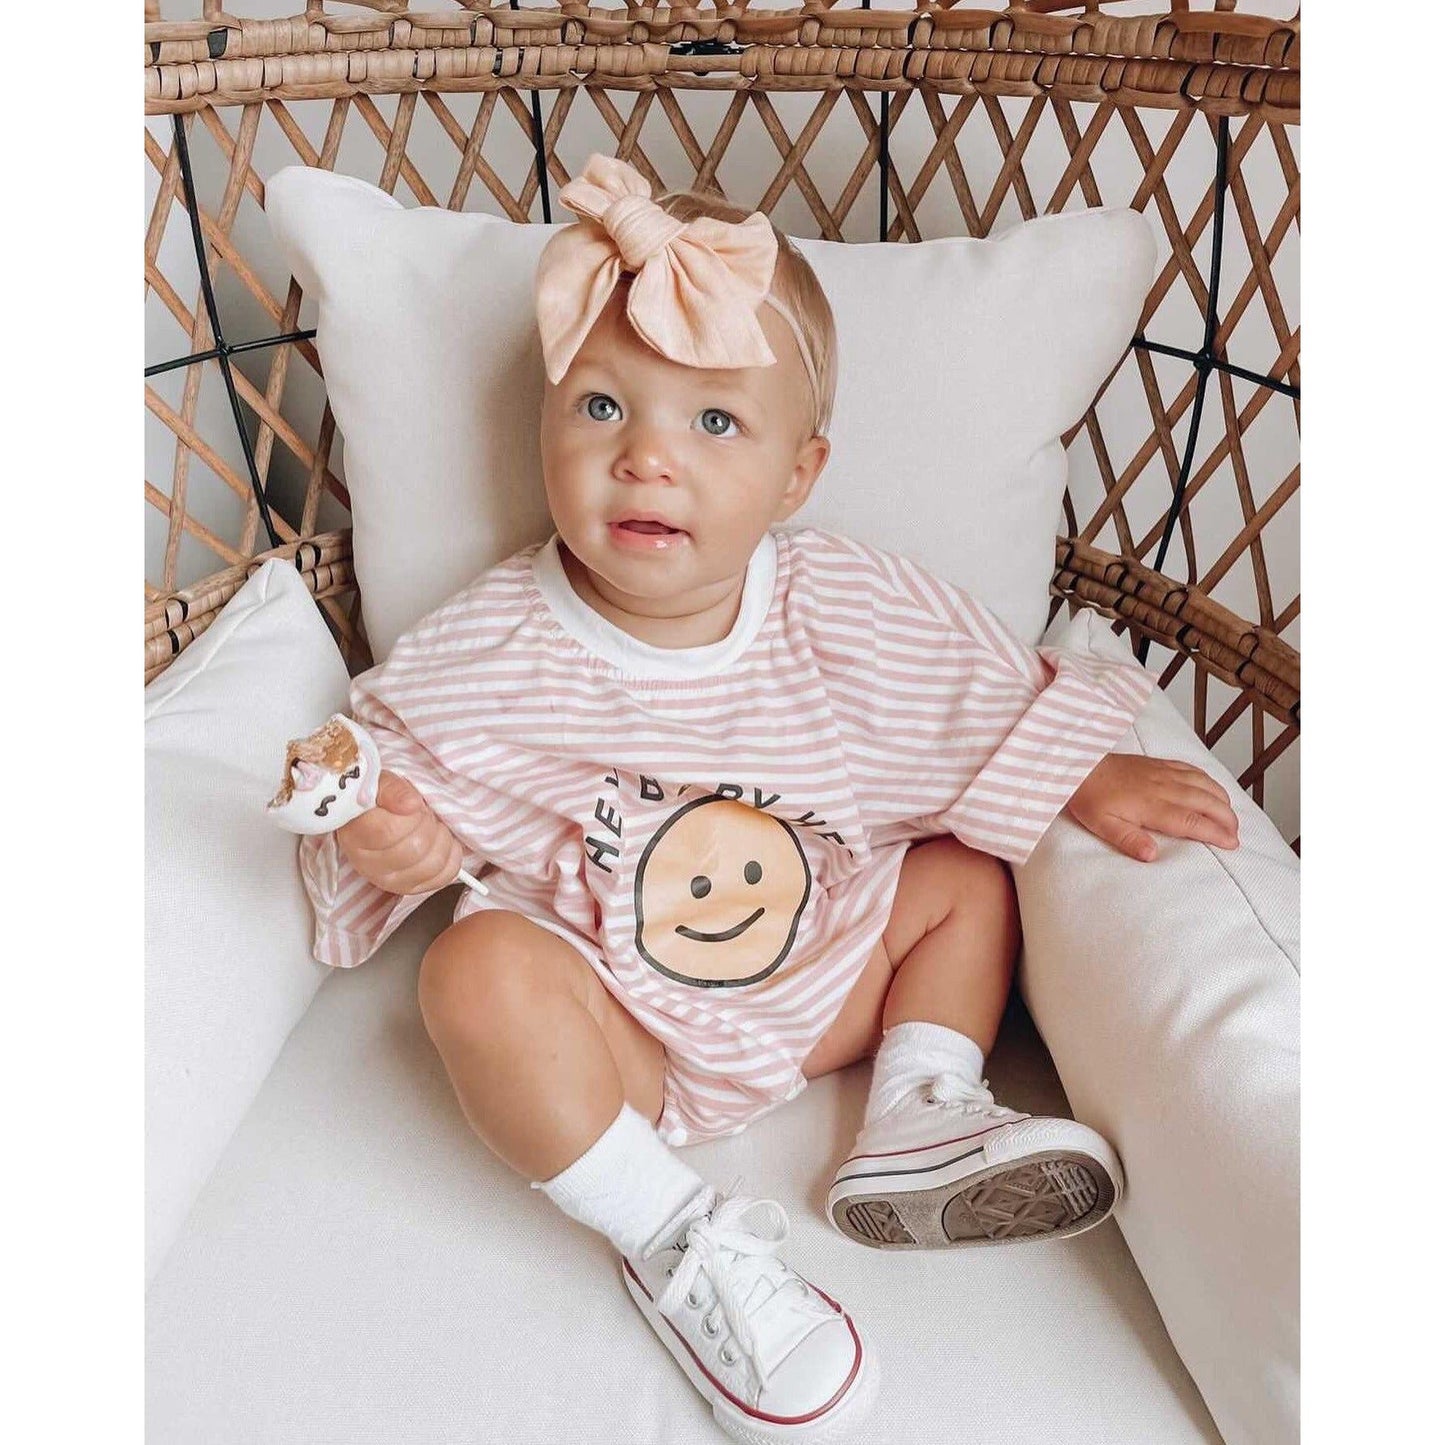 Baby girl in pink bubble romper with smiley face on sweatshirt